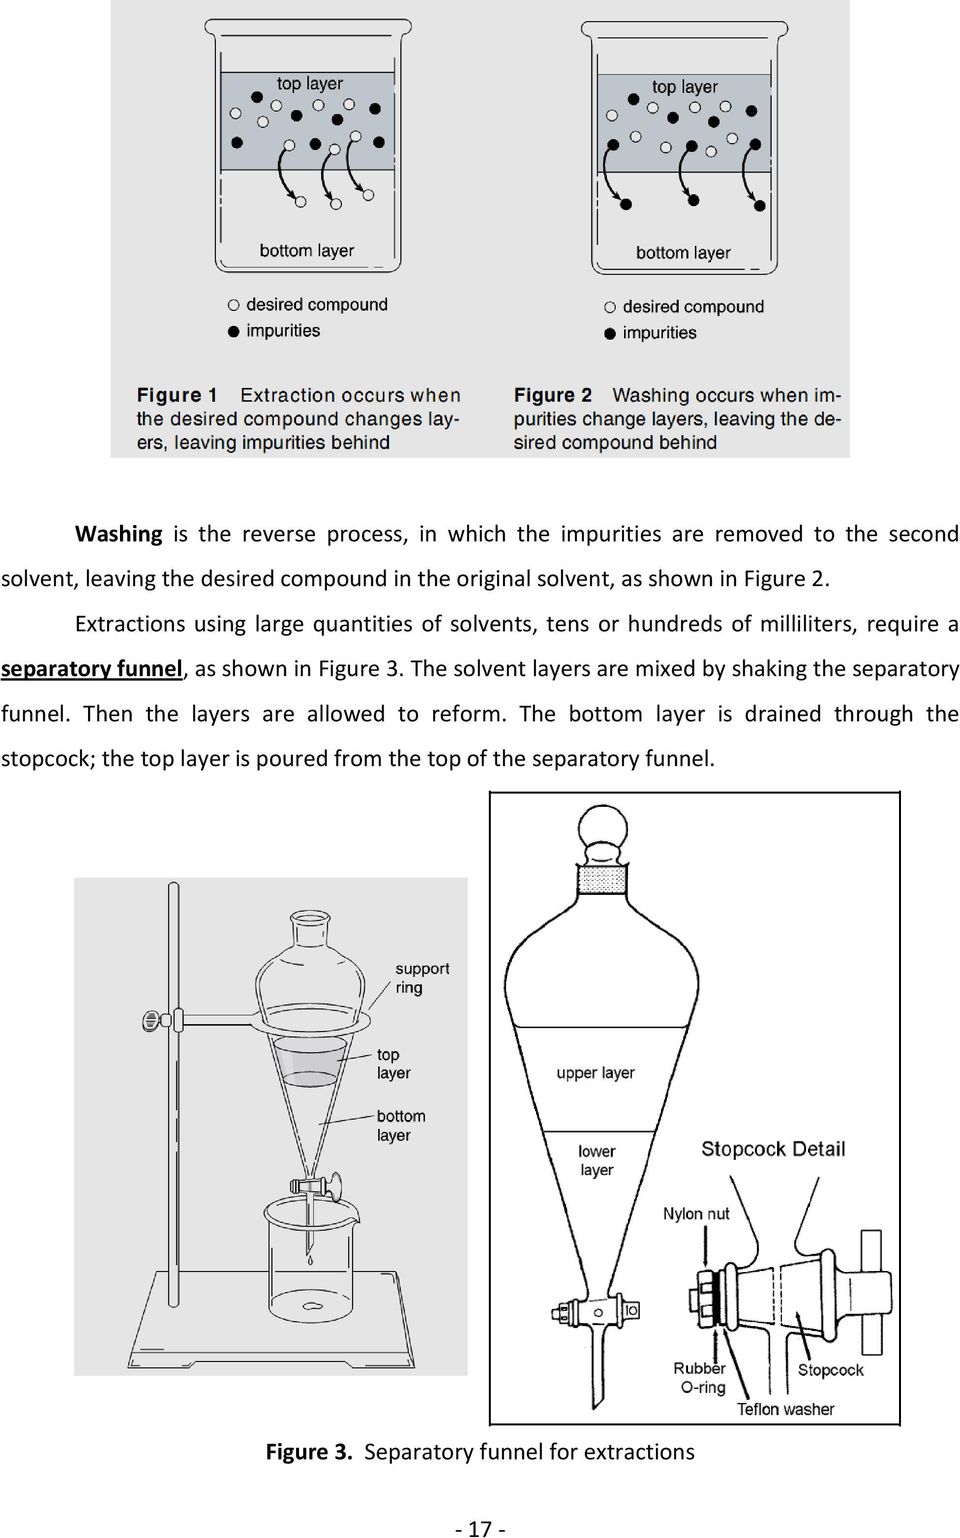 Extractions using large quantities of solvents, tens or hundreds of milliliters, require a separatory funnel, as shown in Figure 3.